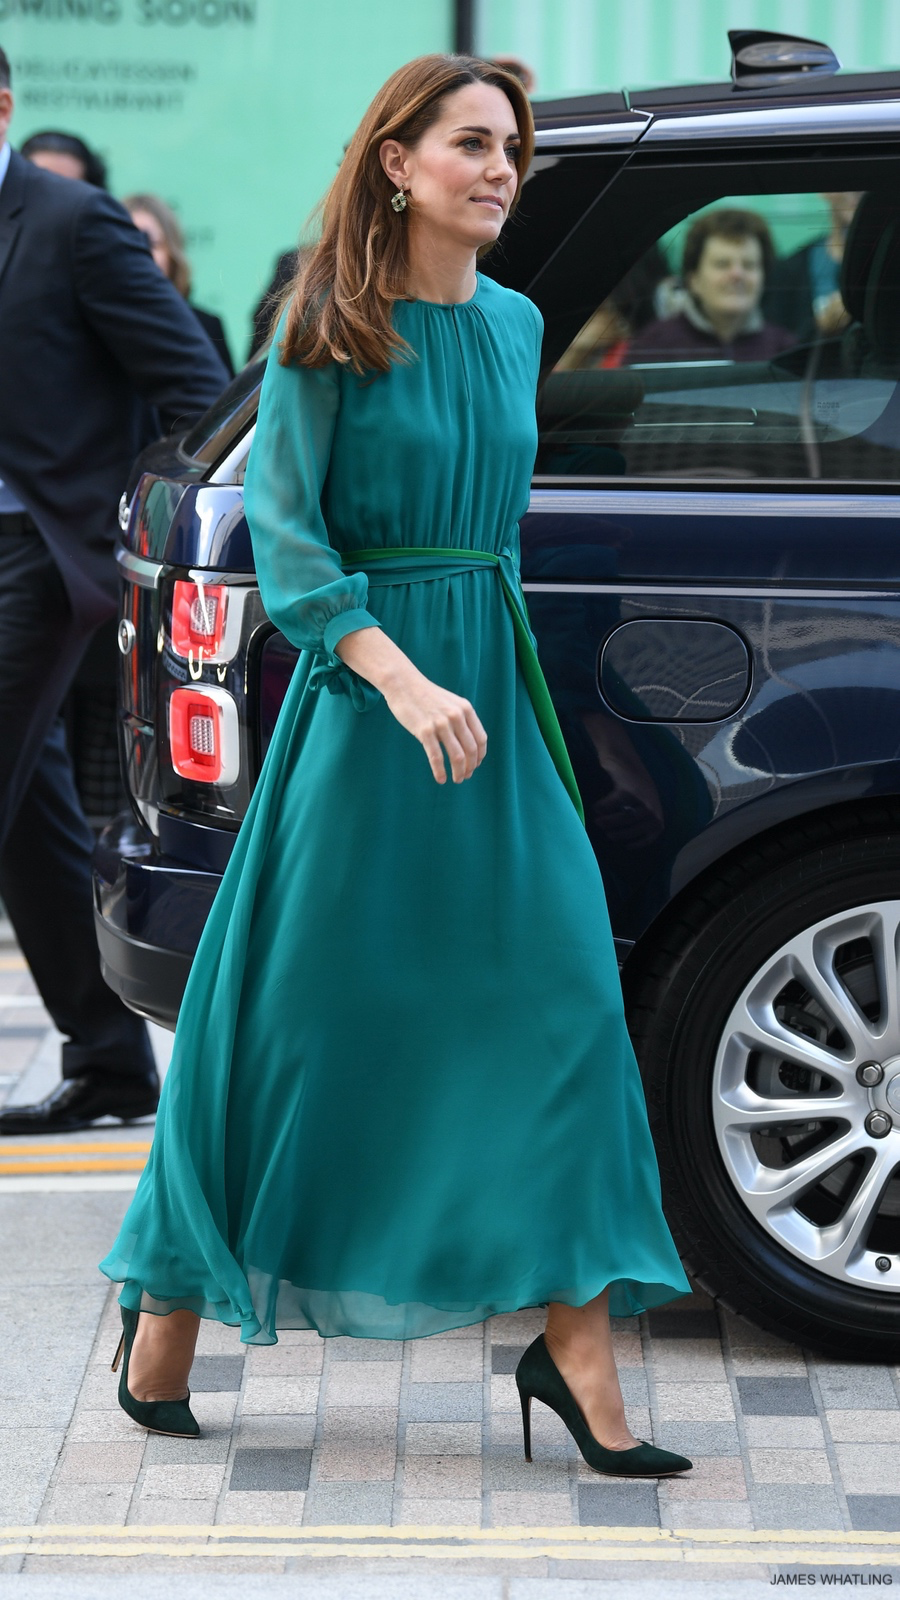 Kate Middleton in Aross girl x soler ‘Amanda’ dress on October 2019 for visit to Aga Khan centre in London, a teal silk georgette dress featuring long blouson sleeves that tie at the cuffs.